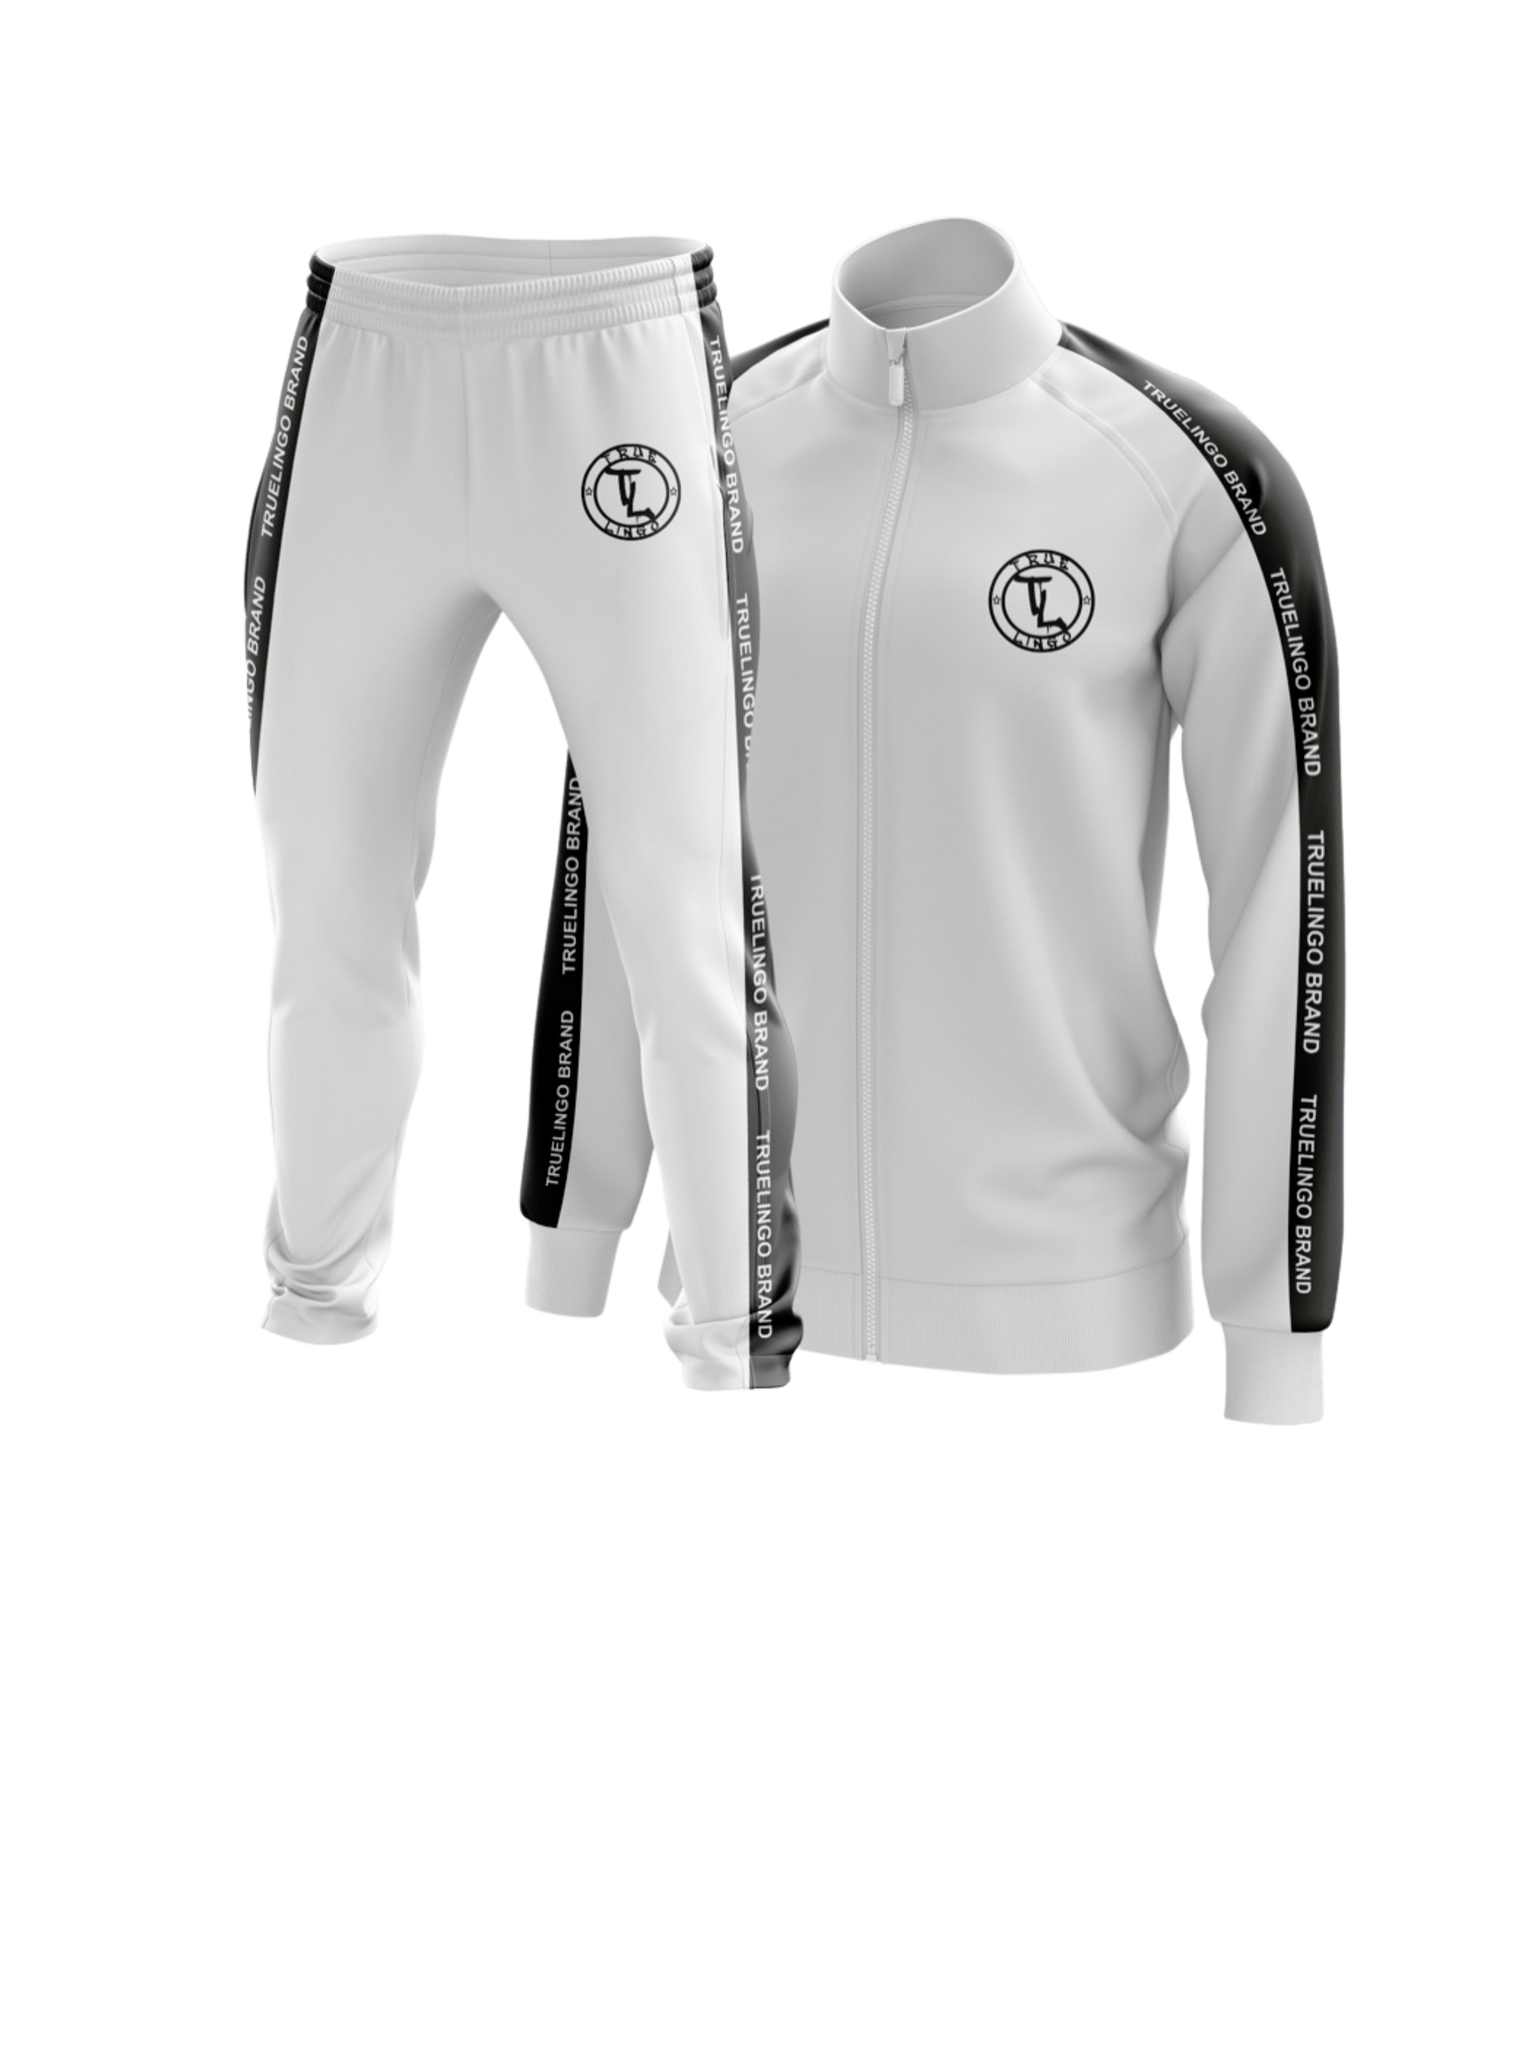 Track Suit - Sports & Fashion Clothing Brand